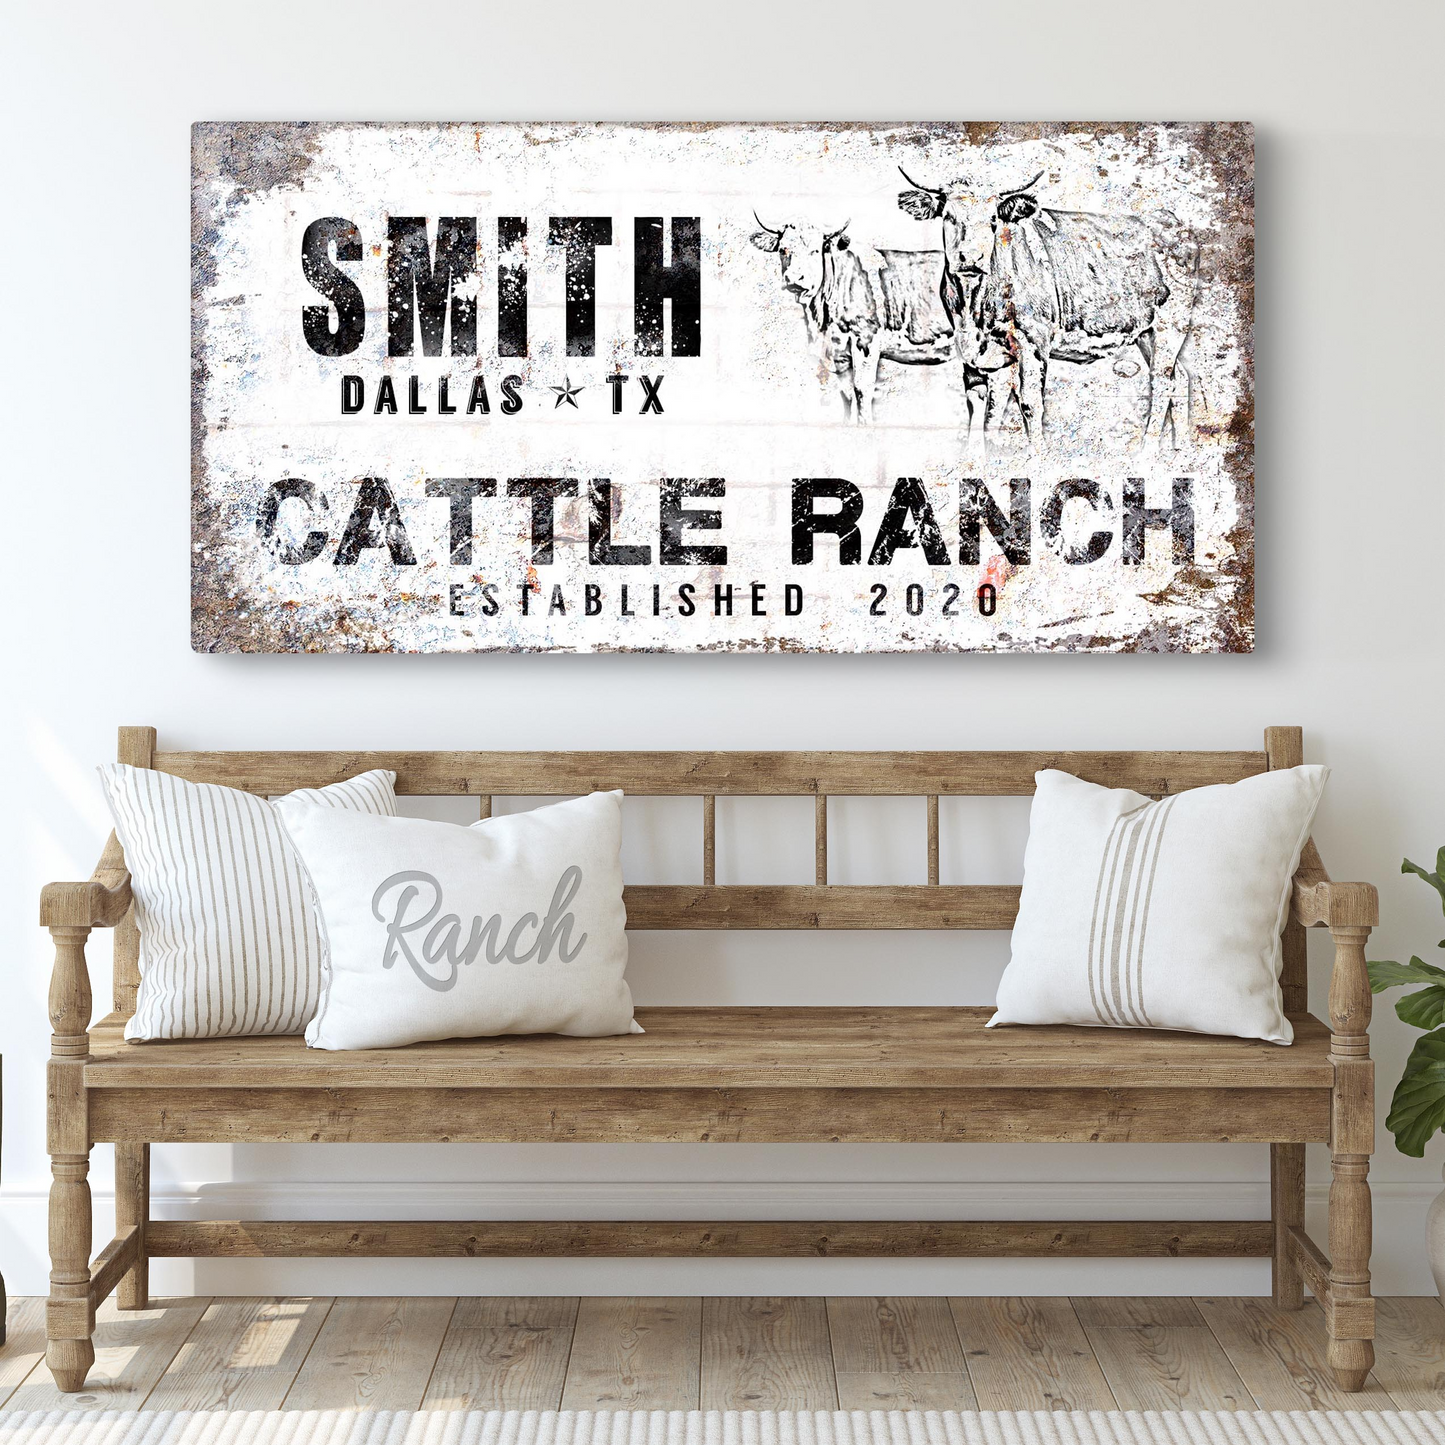 Modern Rustic Cattle Ranch Sign - Image by Tailored Canvases